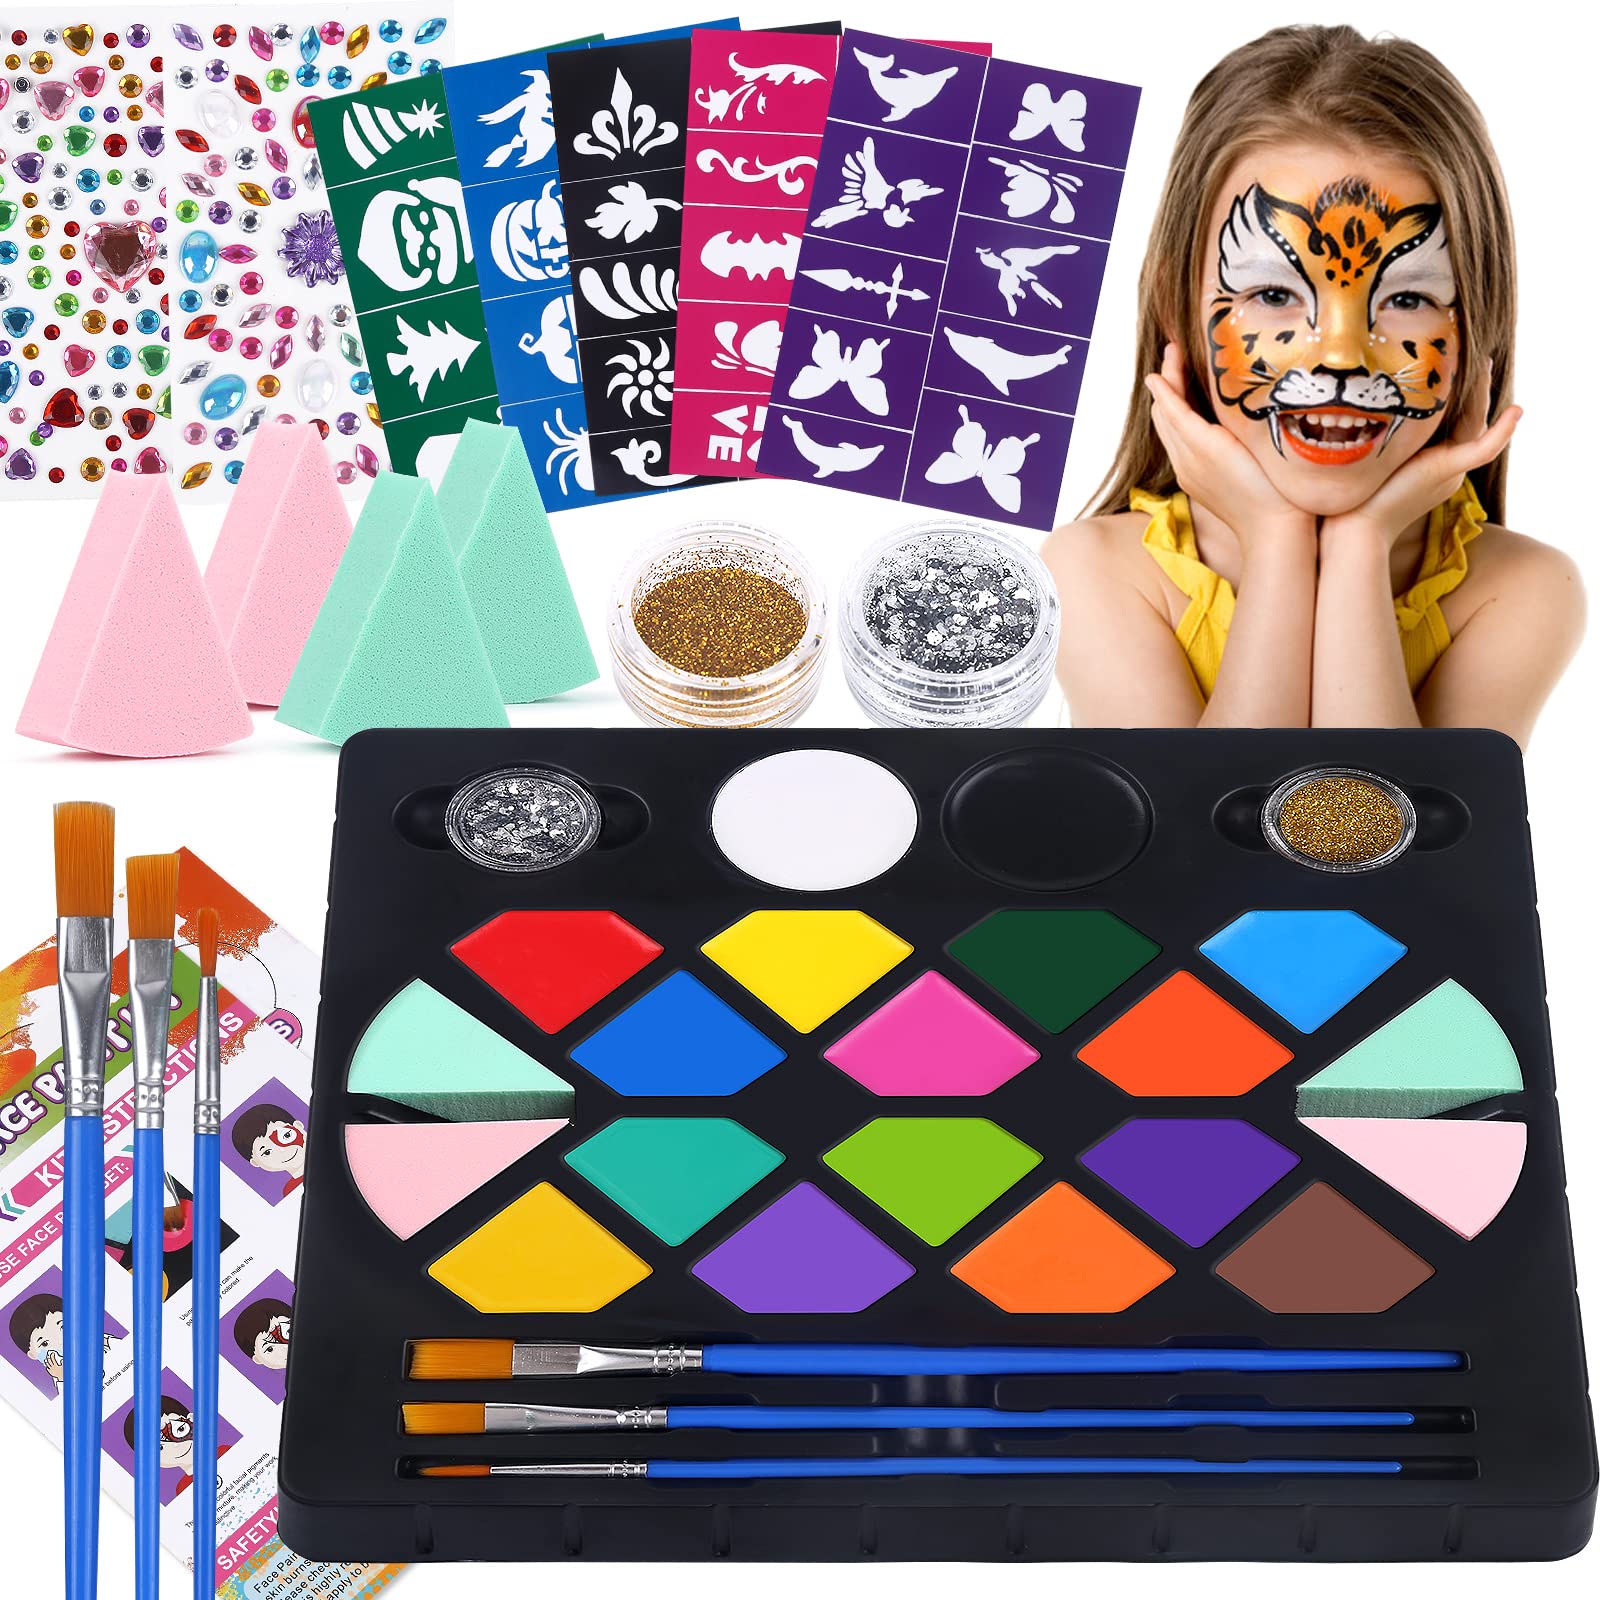  Face Body Paint Kit for Kids, 18 Colors Face Painting Kits,  Halloween Easter Professional Makeup Kit with Tattoo Stickers, Template,  Hair Clip, Brush, Cotton Pad for Party, Cosplay, Performances 